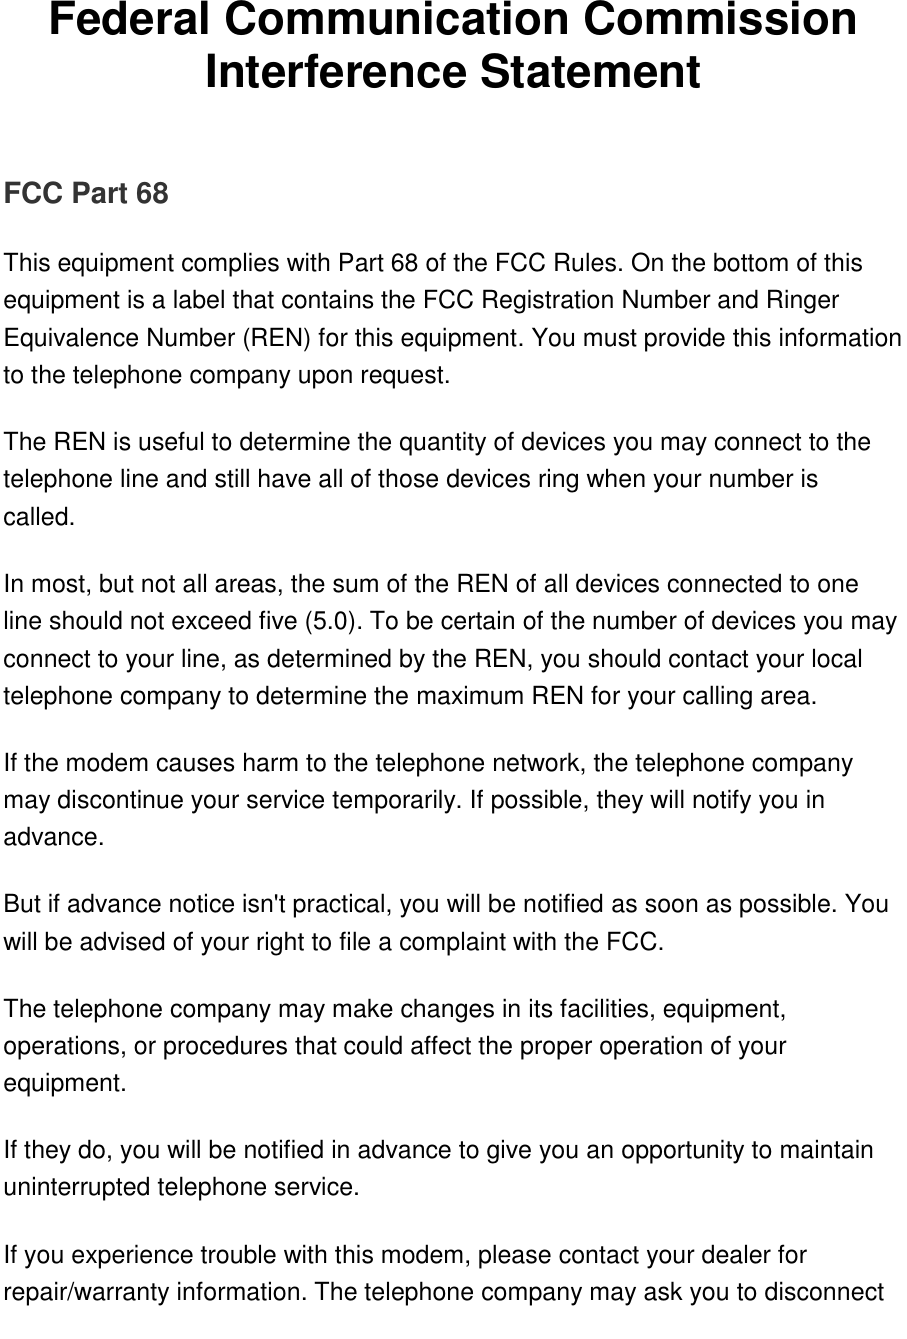   Federal Communication Commission Interference Statement   FCC Part 68 This equipment complies with Part 68 of the FCC Rules. On the bottom of this equipment is a label that contains the FCC Registration Number and Ringer Equivalence Number (REN) for this equipment. You must provide this information to the telephone company upon request. The REN is useful to determine the quantity of devices you may connect to the telephone line and still have all of those devices ring when your number is called.  In most, but not all areas, the sum of the REN of all devices connected to one line should not exceed five (5.0). To be certain of the number of devices you may connect to your line, as determined by the REN, you should contact your local telephone company to determine the maximum REN for your calling area. If the modem causes harm to the telephone network, the telephone company may discontinue your service temporarily. If possible, they will notify you in advance. But if advance notice isn&apos;t practical, you will be notified as soon as possible. You will be advised of your right to file a complaint with the FCC. The telephone company may make changes in its facilities, equipment, operations, or procedures that could affect the proper operation of your equipment.  If they do, you will be notified in advance to give you an opportunity to maintain uninterrupted telephone service. If you experience trouble with this modem, please contact your dealer for repair/warranty information. The telephone company may ask you to disconnect 